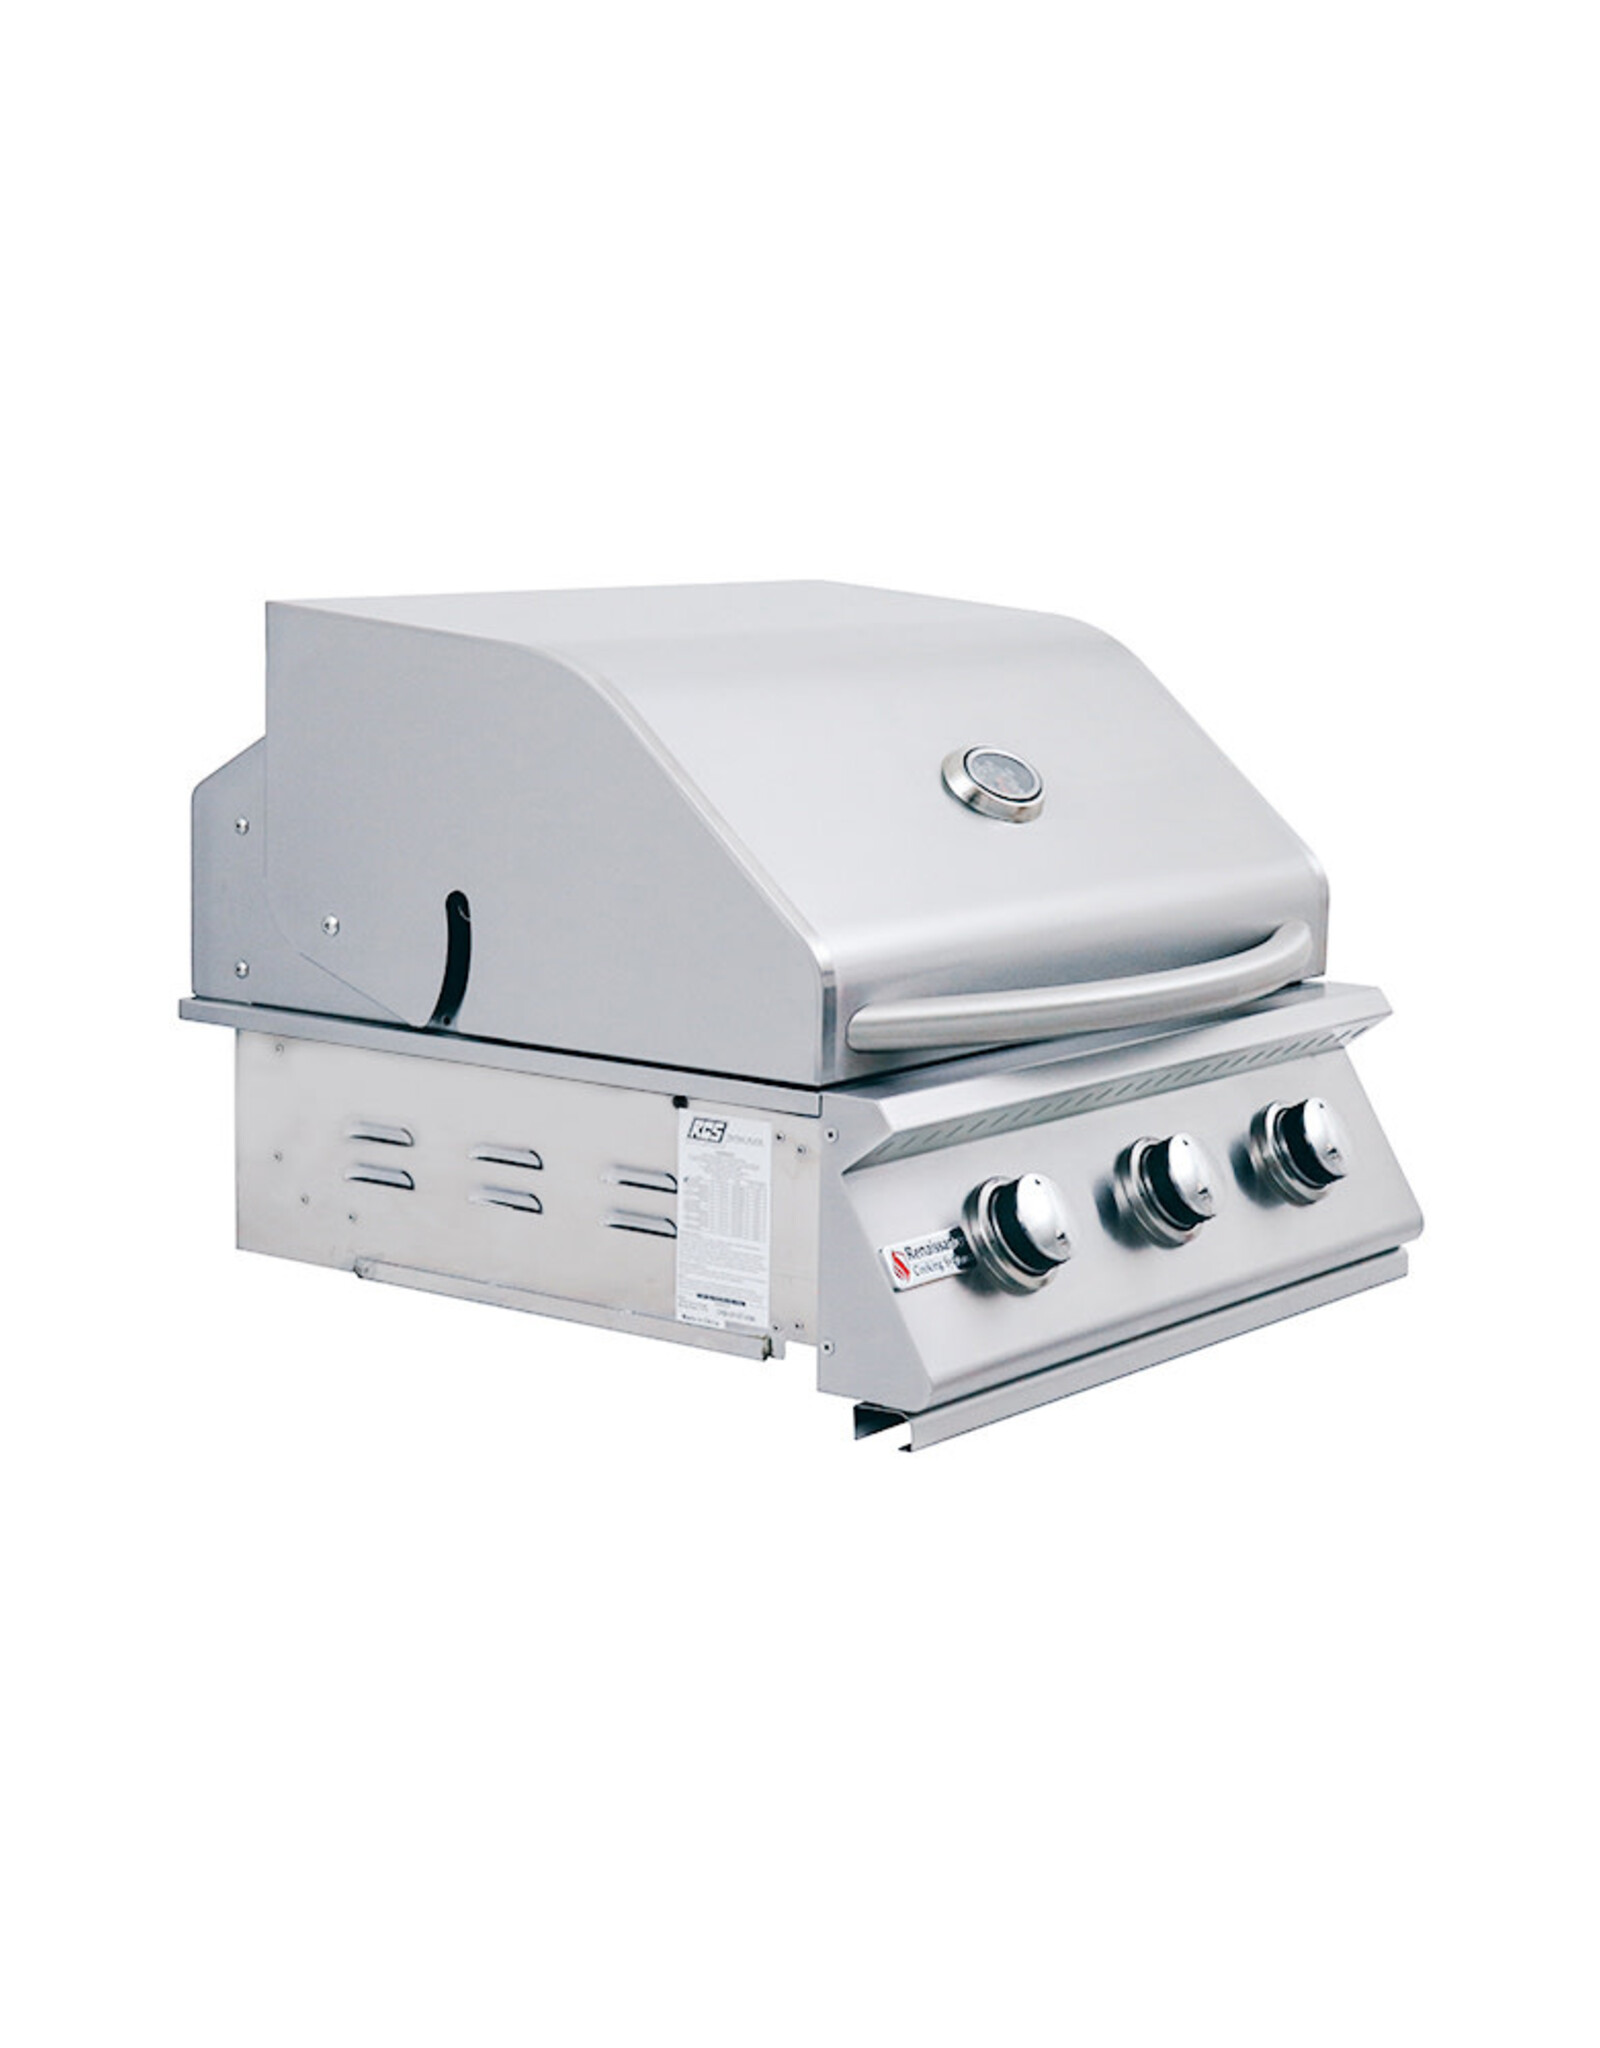 Renaissance Cooking Systems Renaissance Cooking Systems 26" Premier Drop-In Grill - Natural Gas - RJC26A